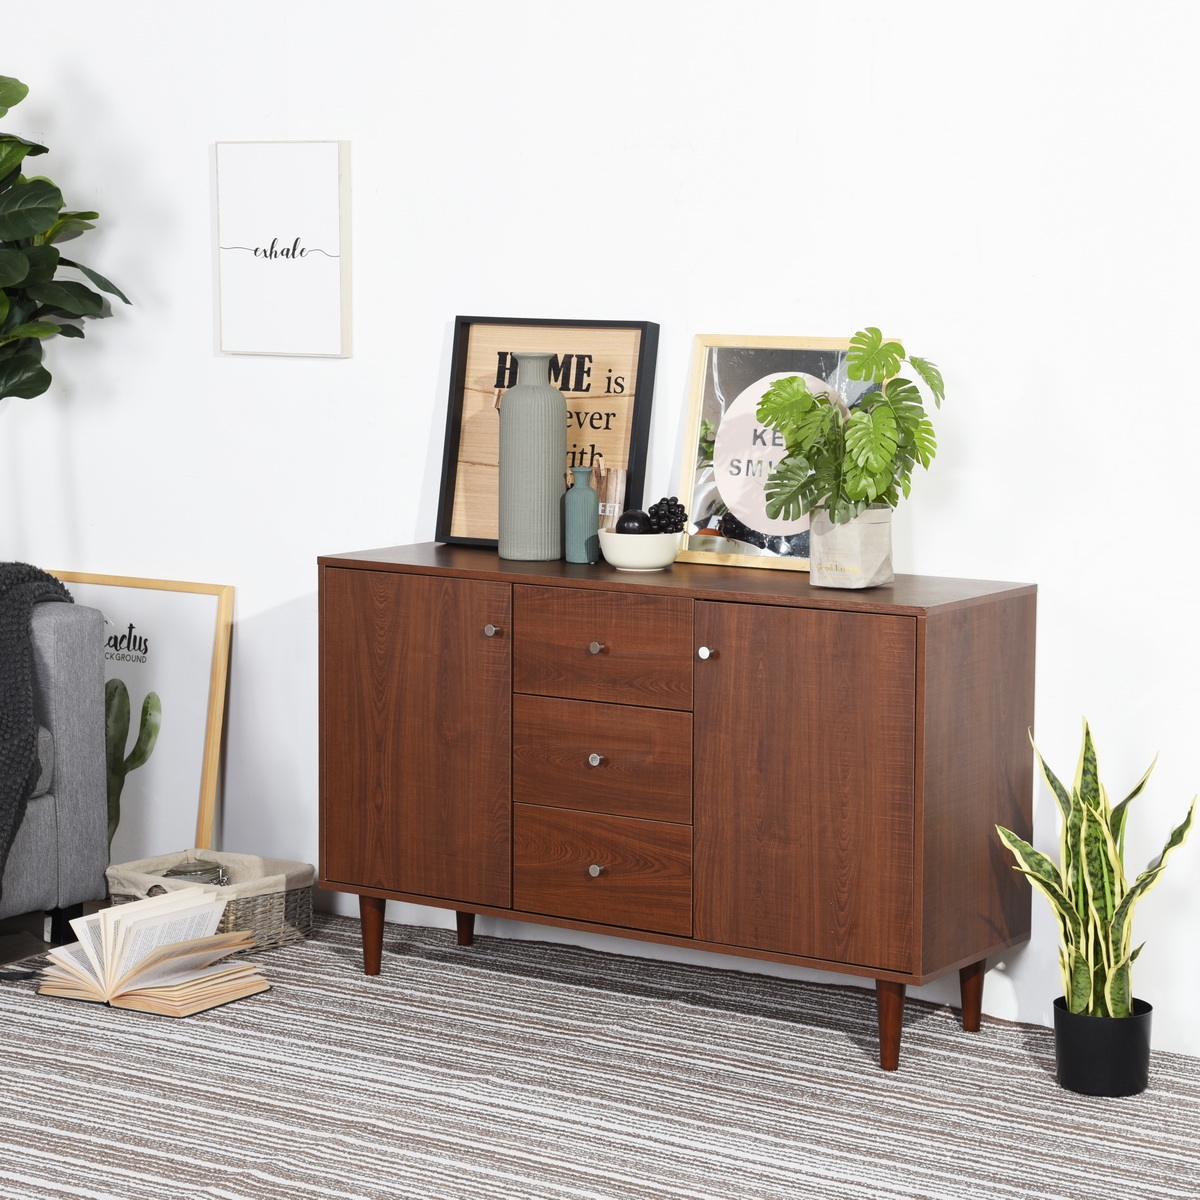 47.2 inch Industrial Sideboard features 2 Doors, 3 Drawers and 2 Cabinets with Large storage spaces - Brown